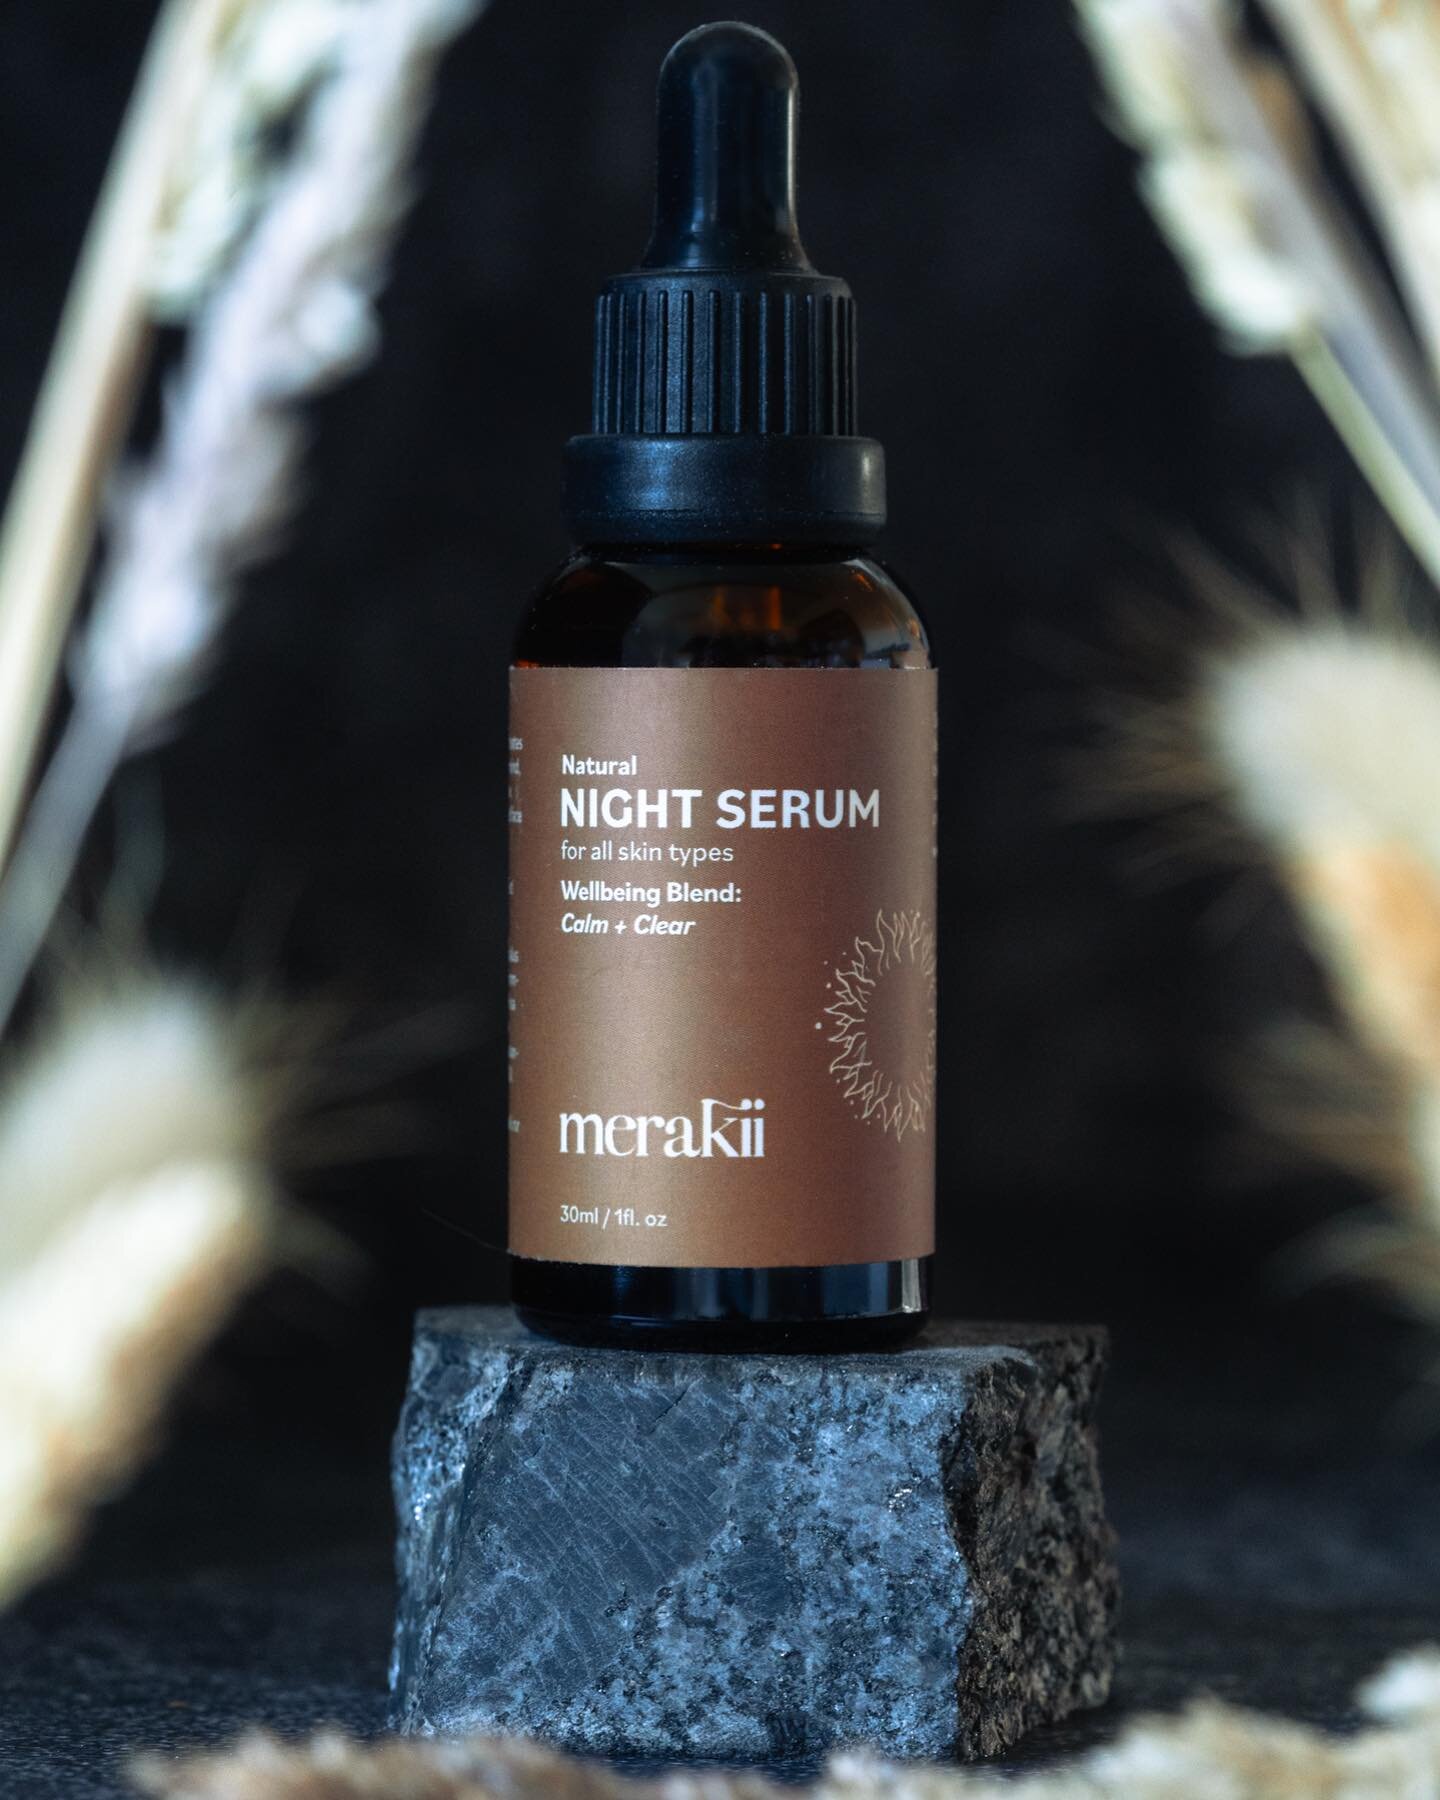 🌿 Ever wondered what's really in your skincare products? 🤔 Your skin deserves the best, and it's time to say NO to harmful toxins! 🚫 At Merakii, our Day and Night Serums and Lip Balm are crafted with all-natural ingredients, giving your skin the l